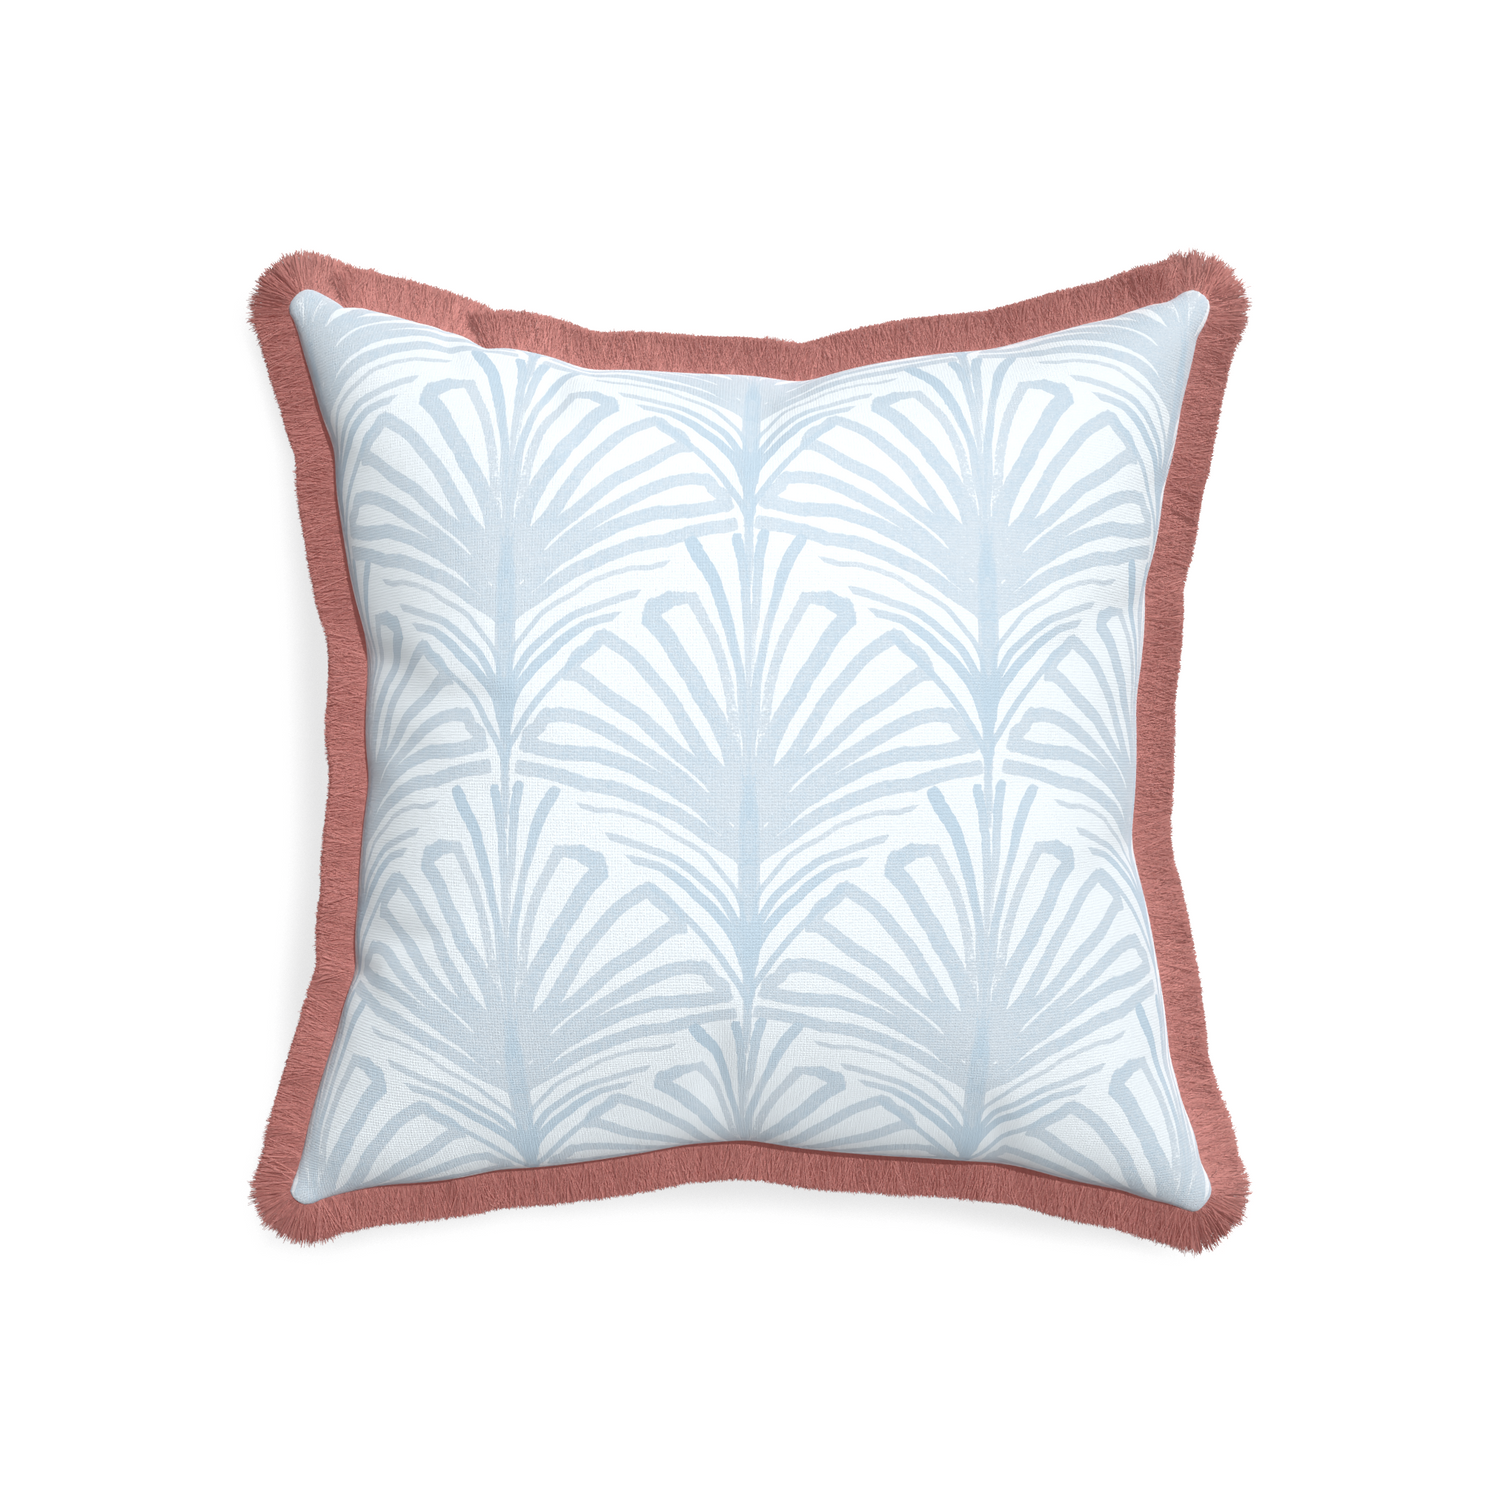 20-square suzy sky custom pillow with d fringe on white background